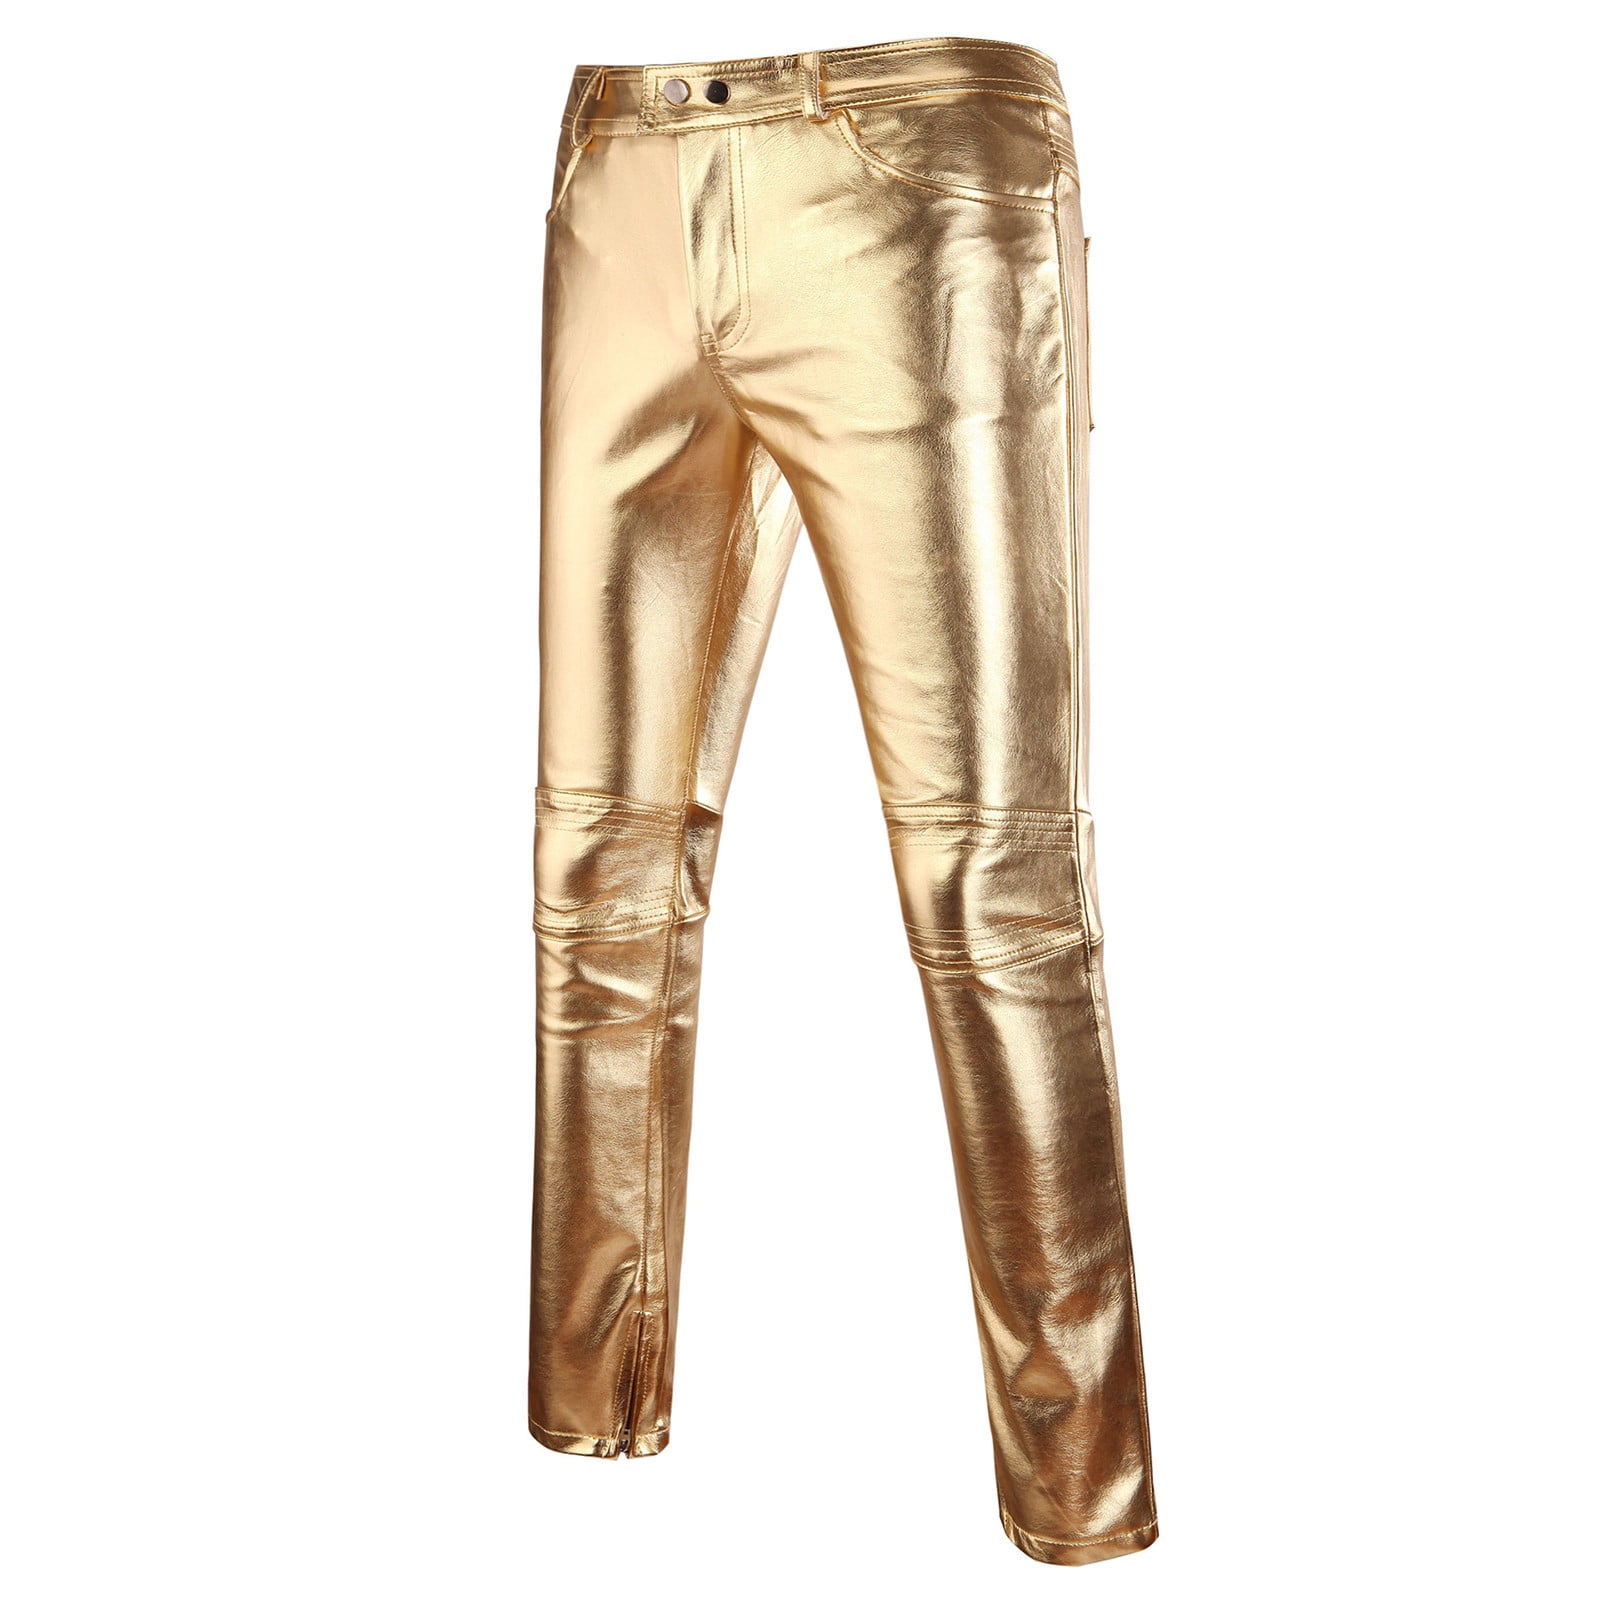 Kayannuo Gold leather Pants Spring Clearance Men's Personality